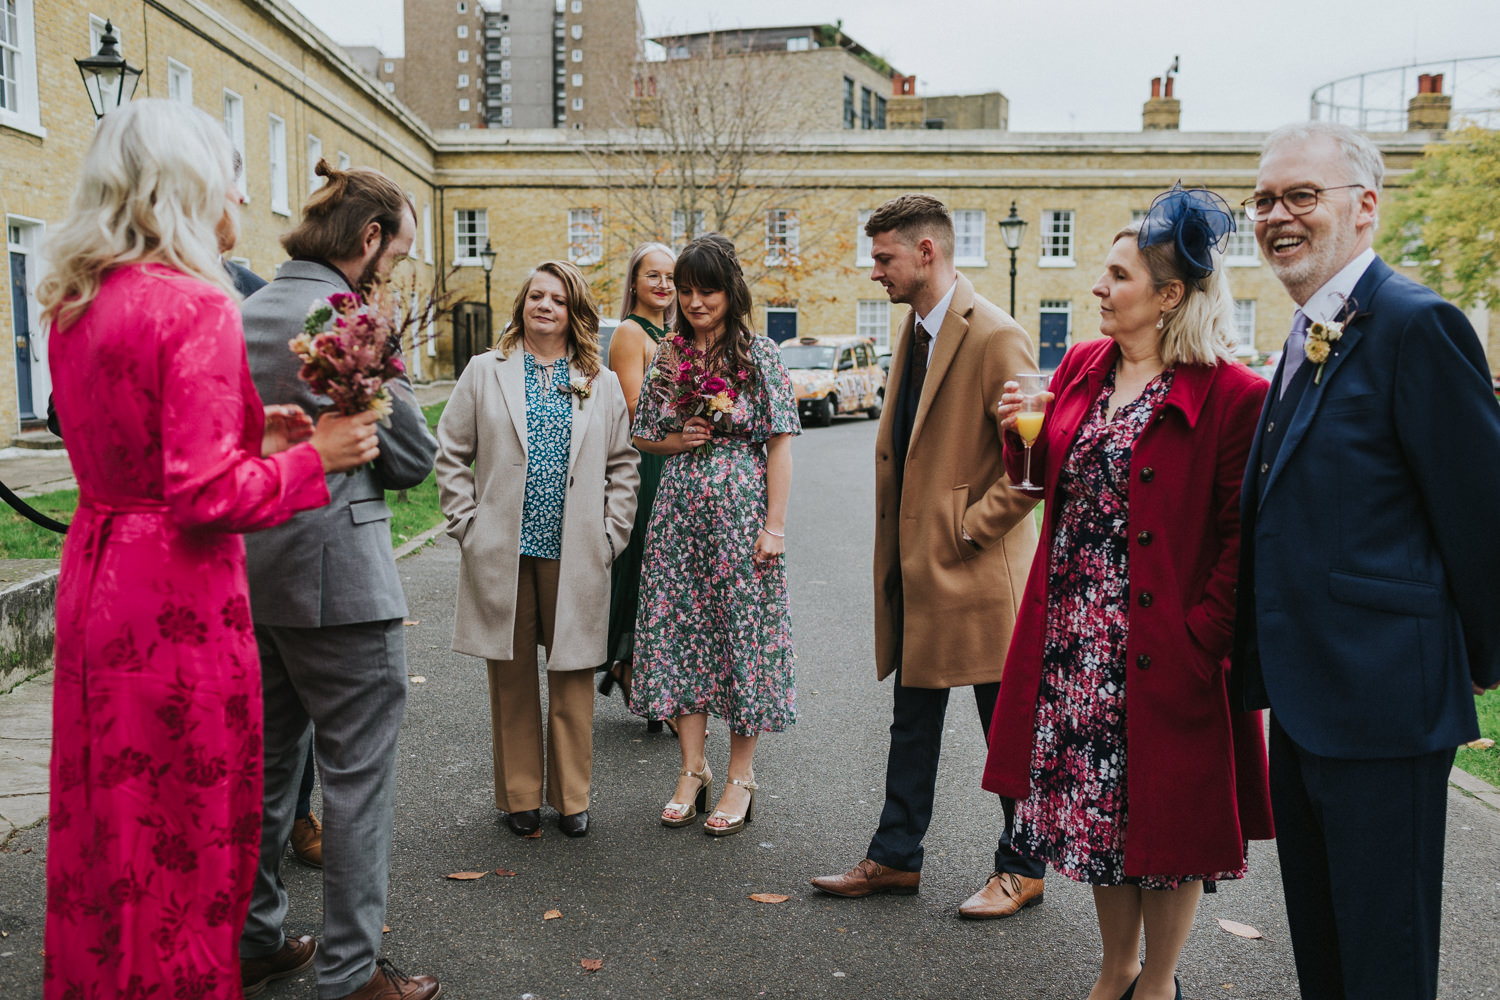 Wedding guests in colourful pattern dresses